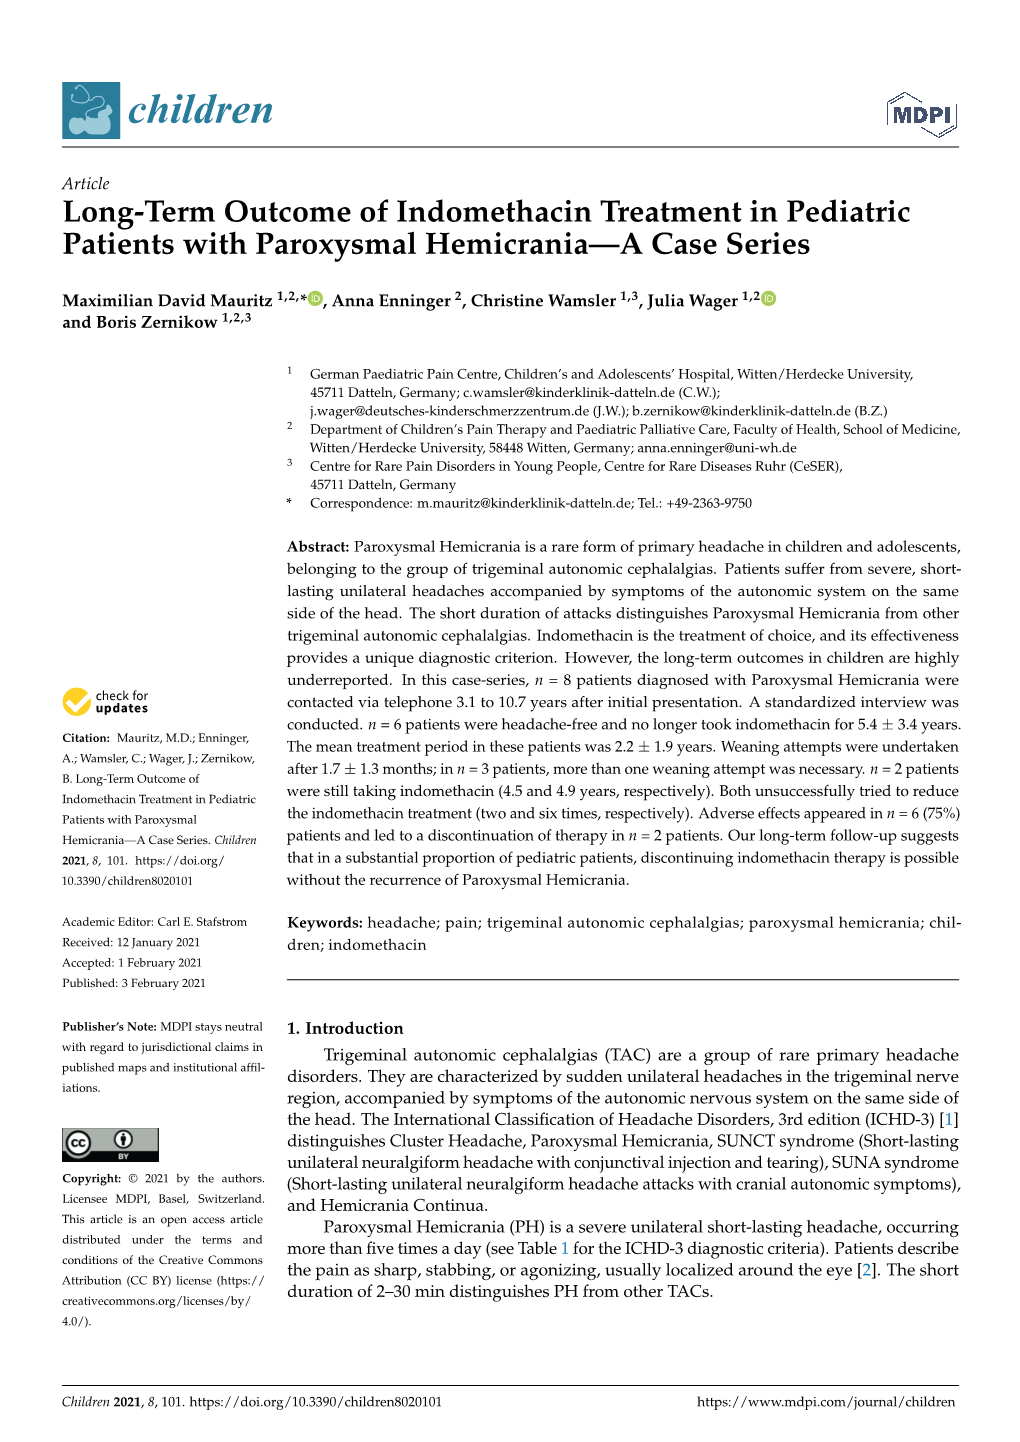 Long-Term Outcome of Indomethacin Treatment in Pediatric Patients with Paroxysmal Hemicrania—A Case Series